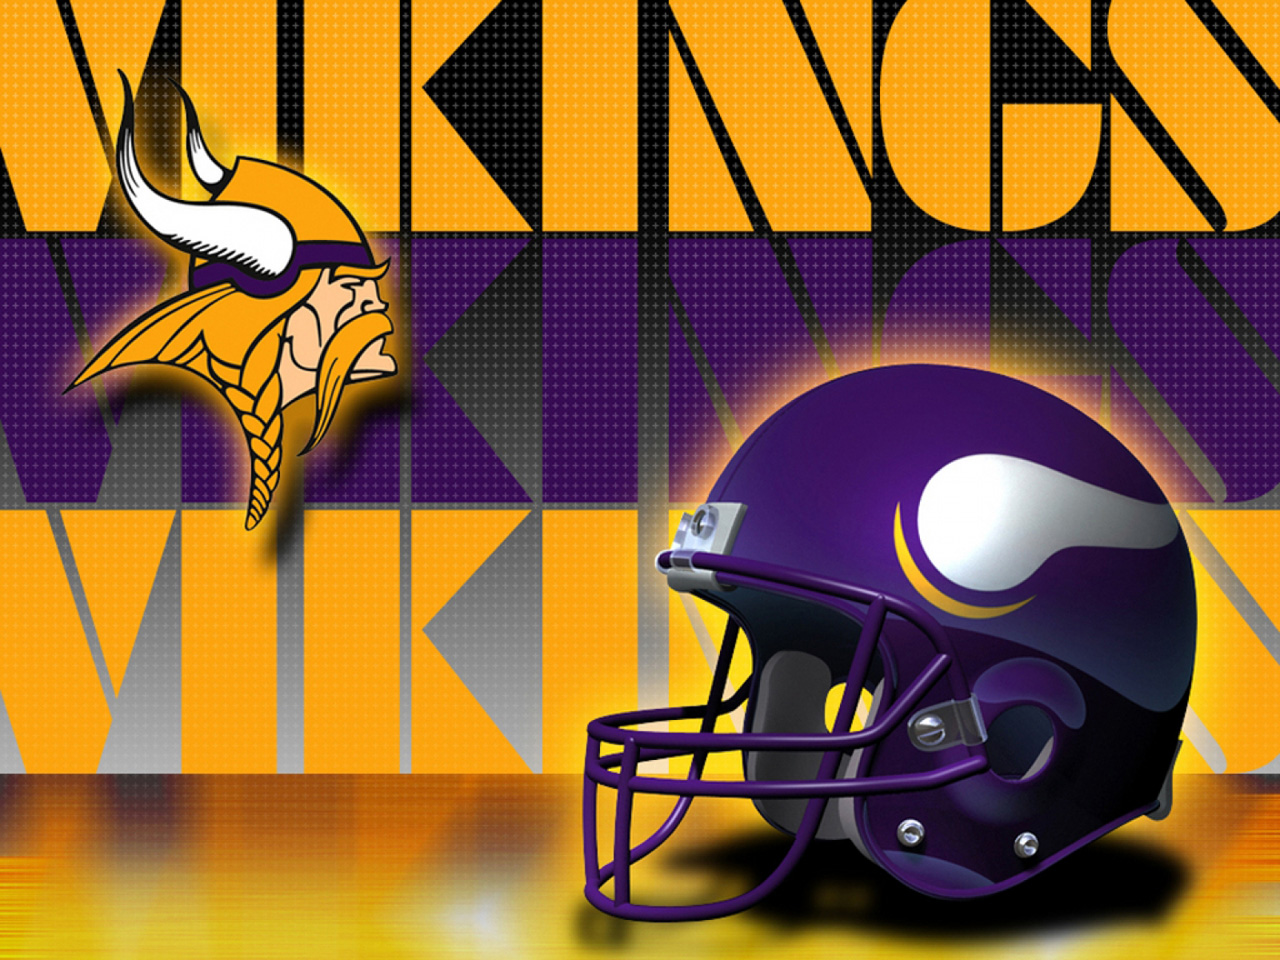  wallpapers or check out these Vikings iPhone wallpapers and Vikings 1280x960